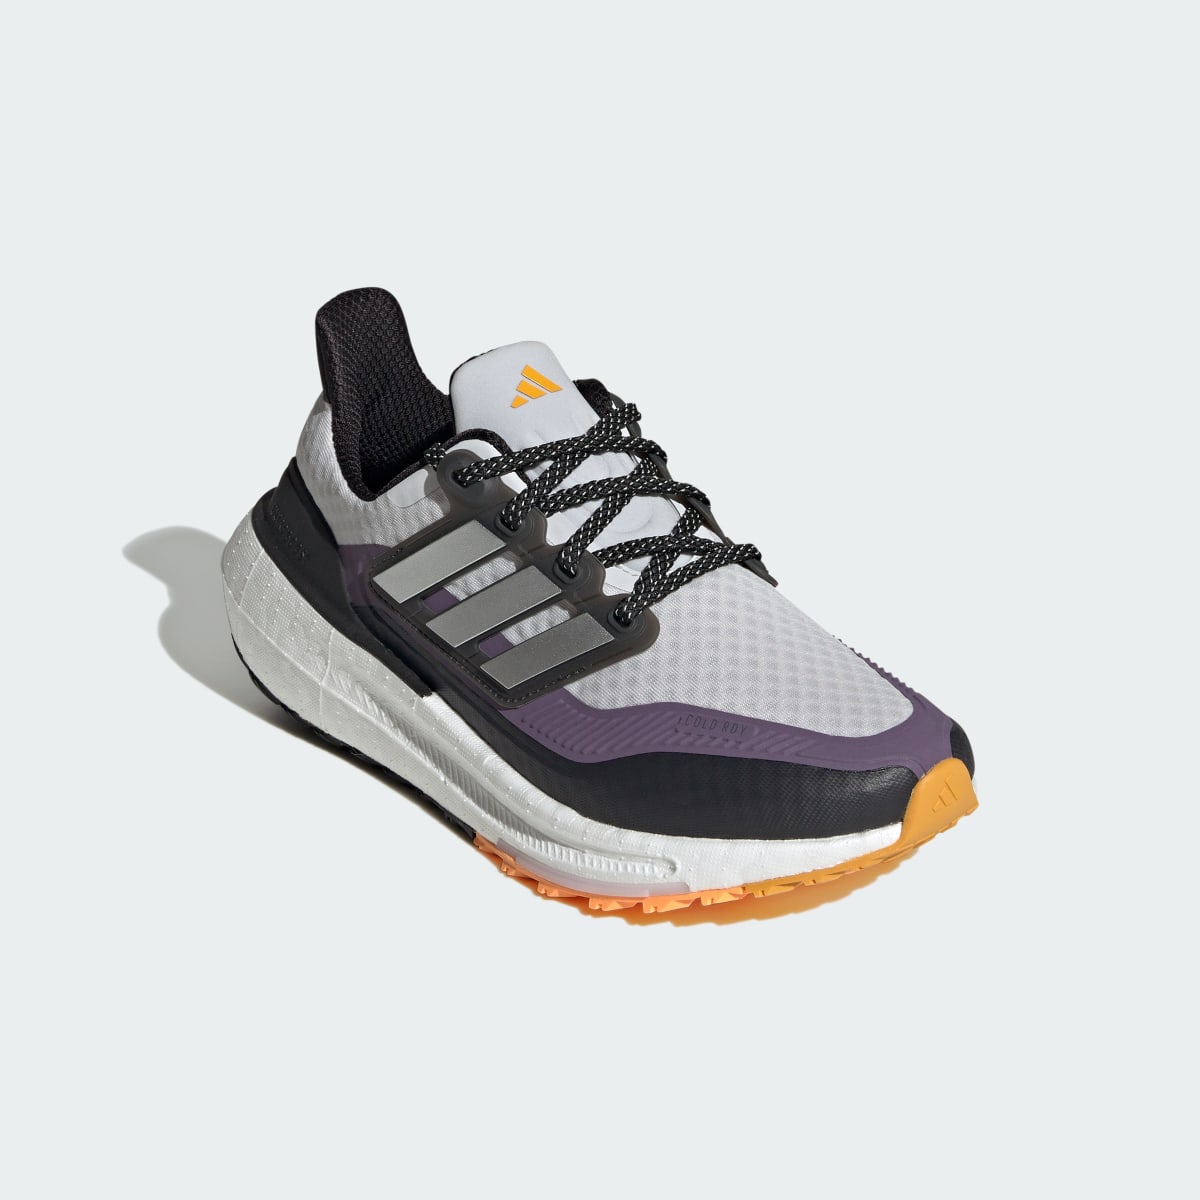 Adidas Ultraboost Light COLD.RDY 2.0 Shoes. 5